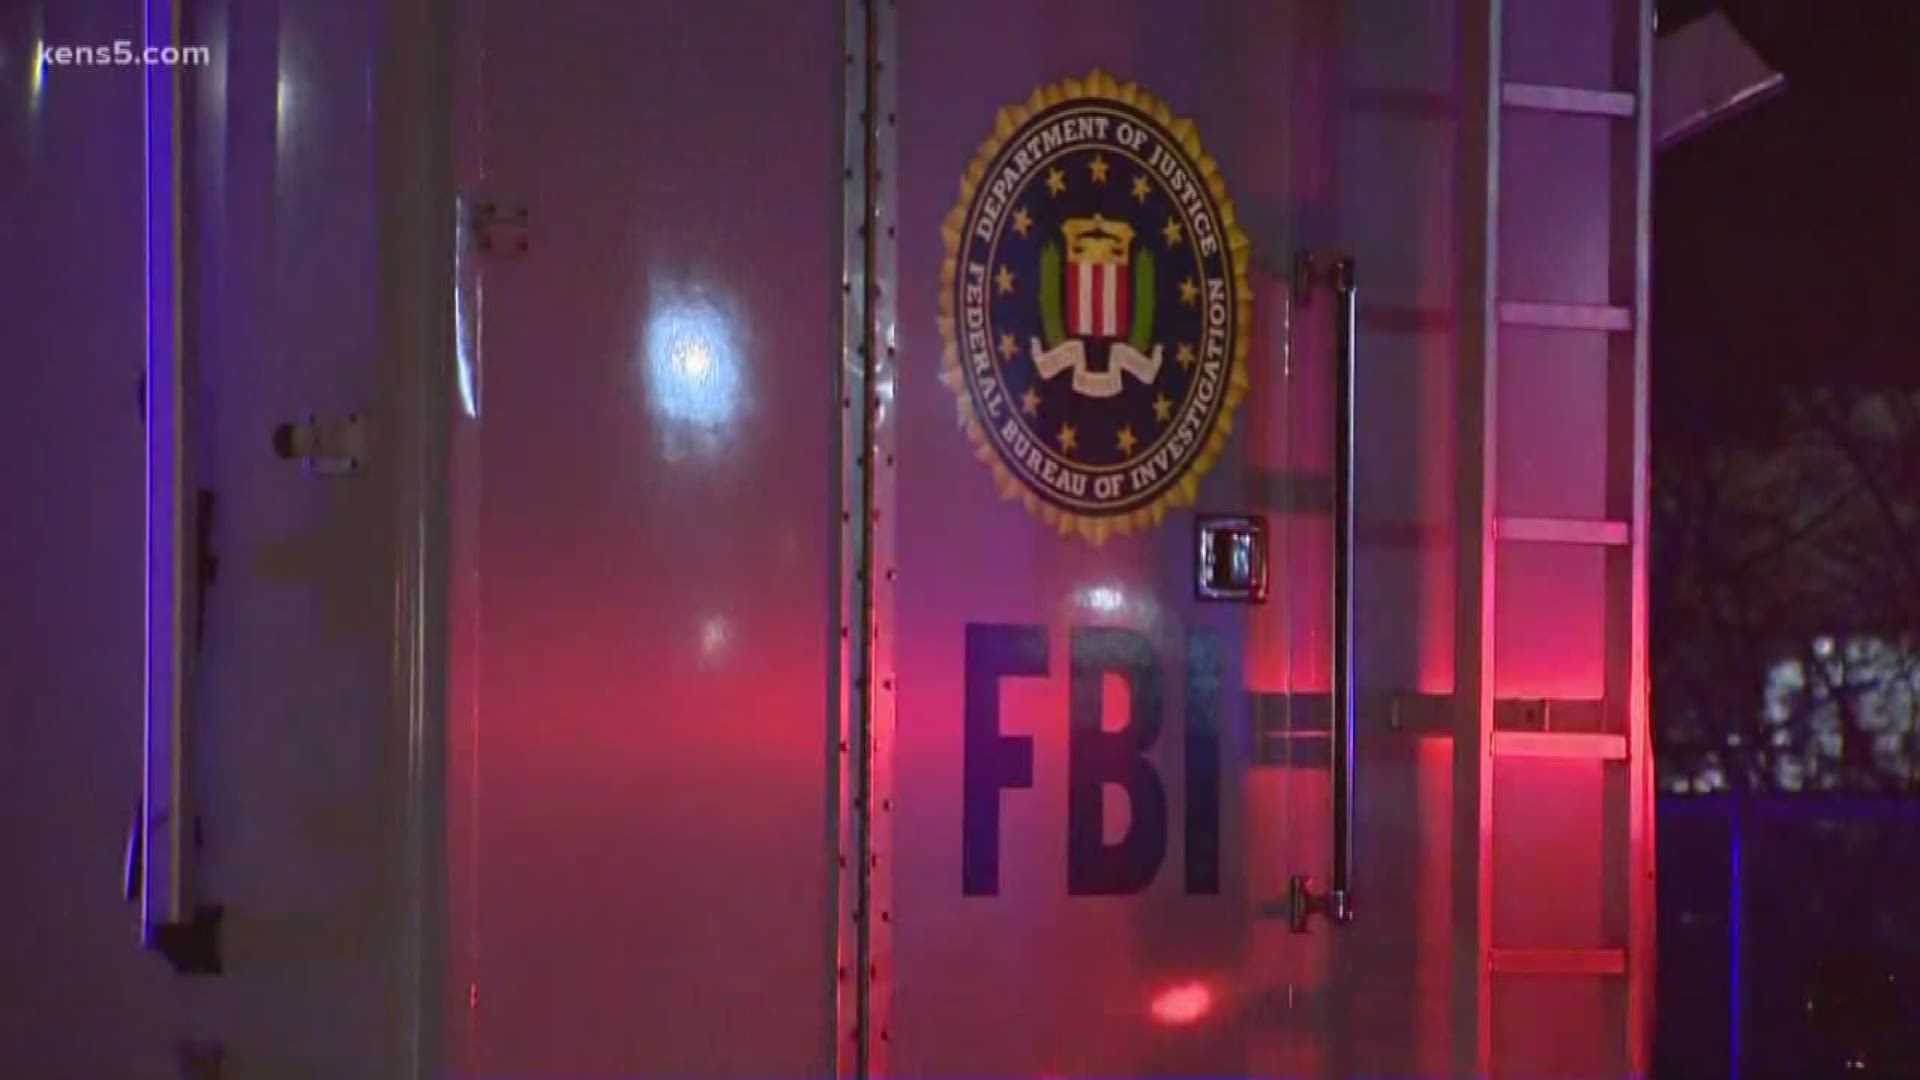 Local FBI agents are expected to miss their second paycheck Friday as the partial federal government shutdown continues.